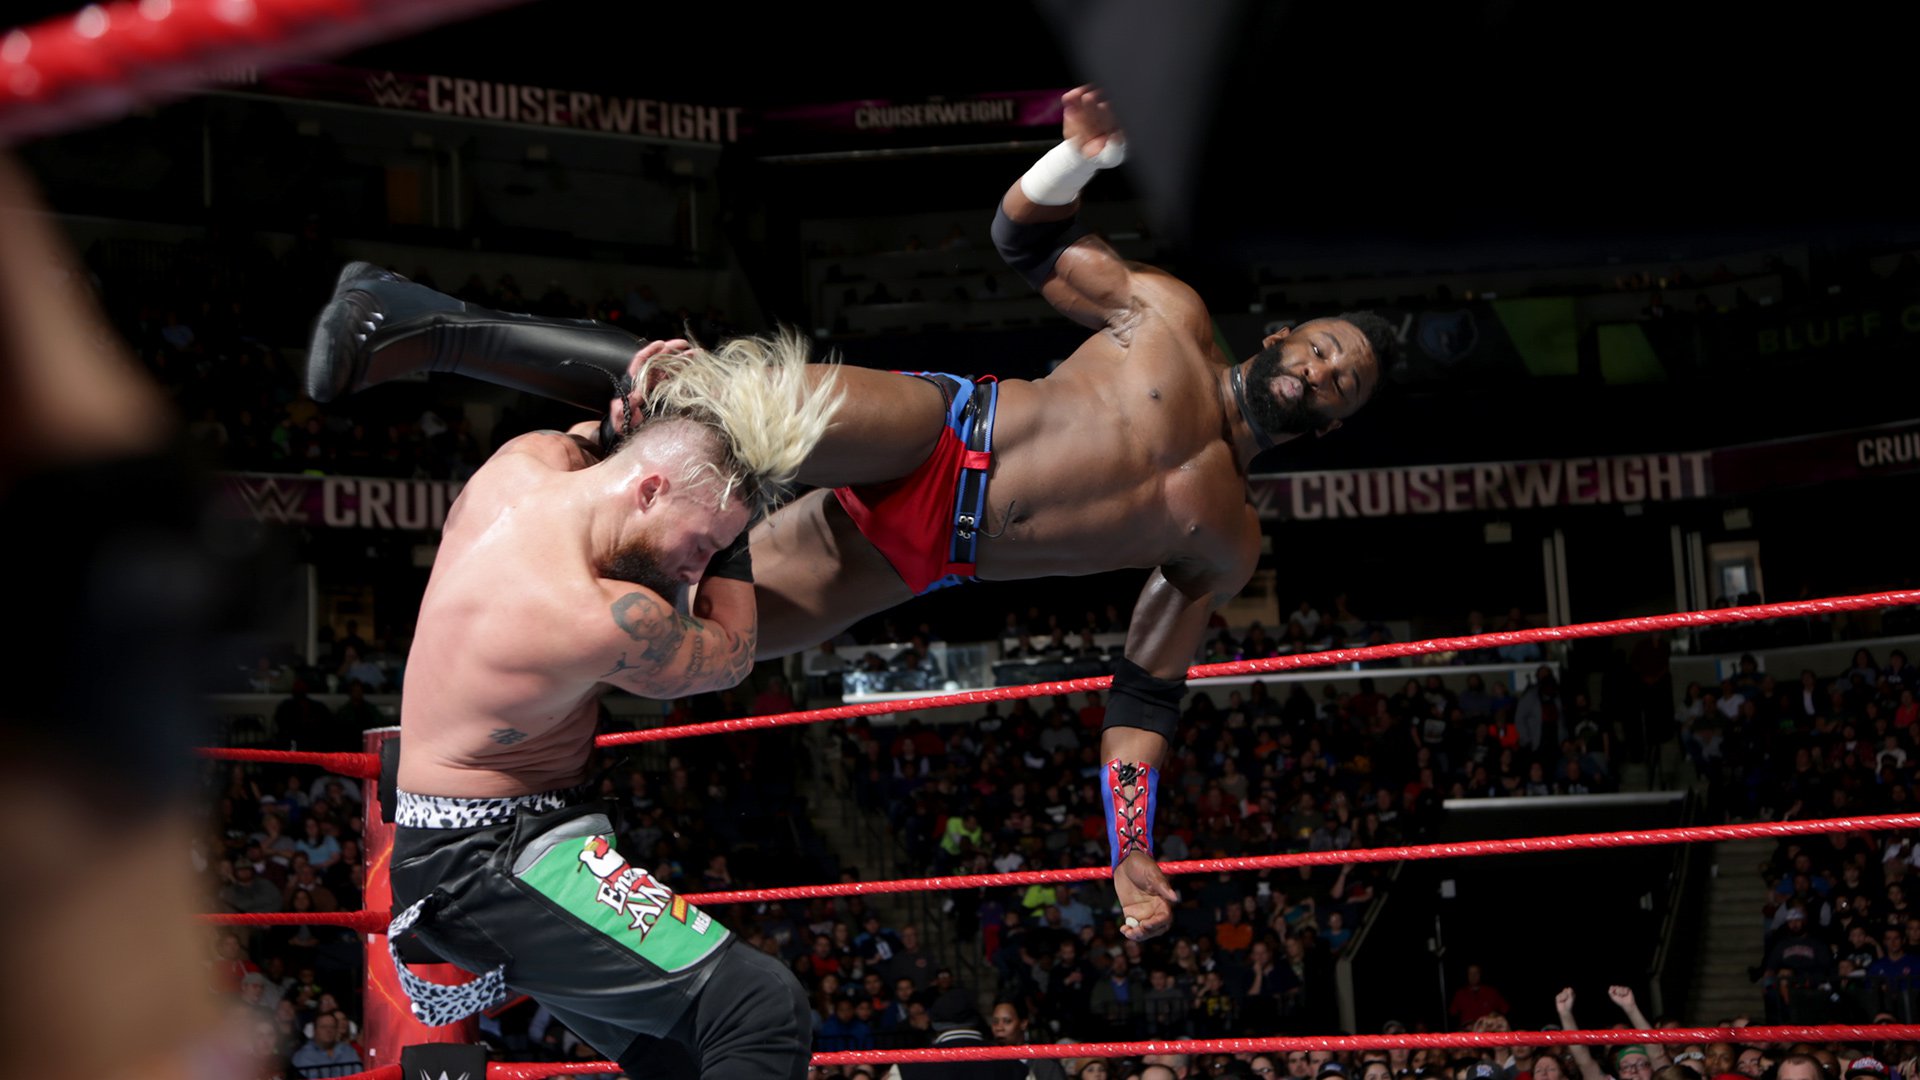 Cedric Alexander Def Wwe Cruiserweight Champion Enzo Amore Via Count Out Wwe 3900